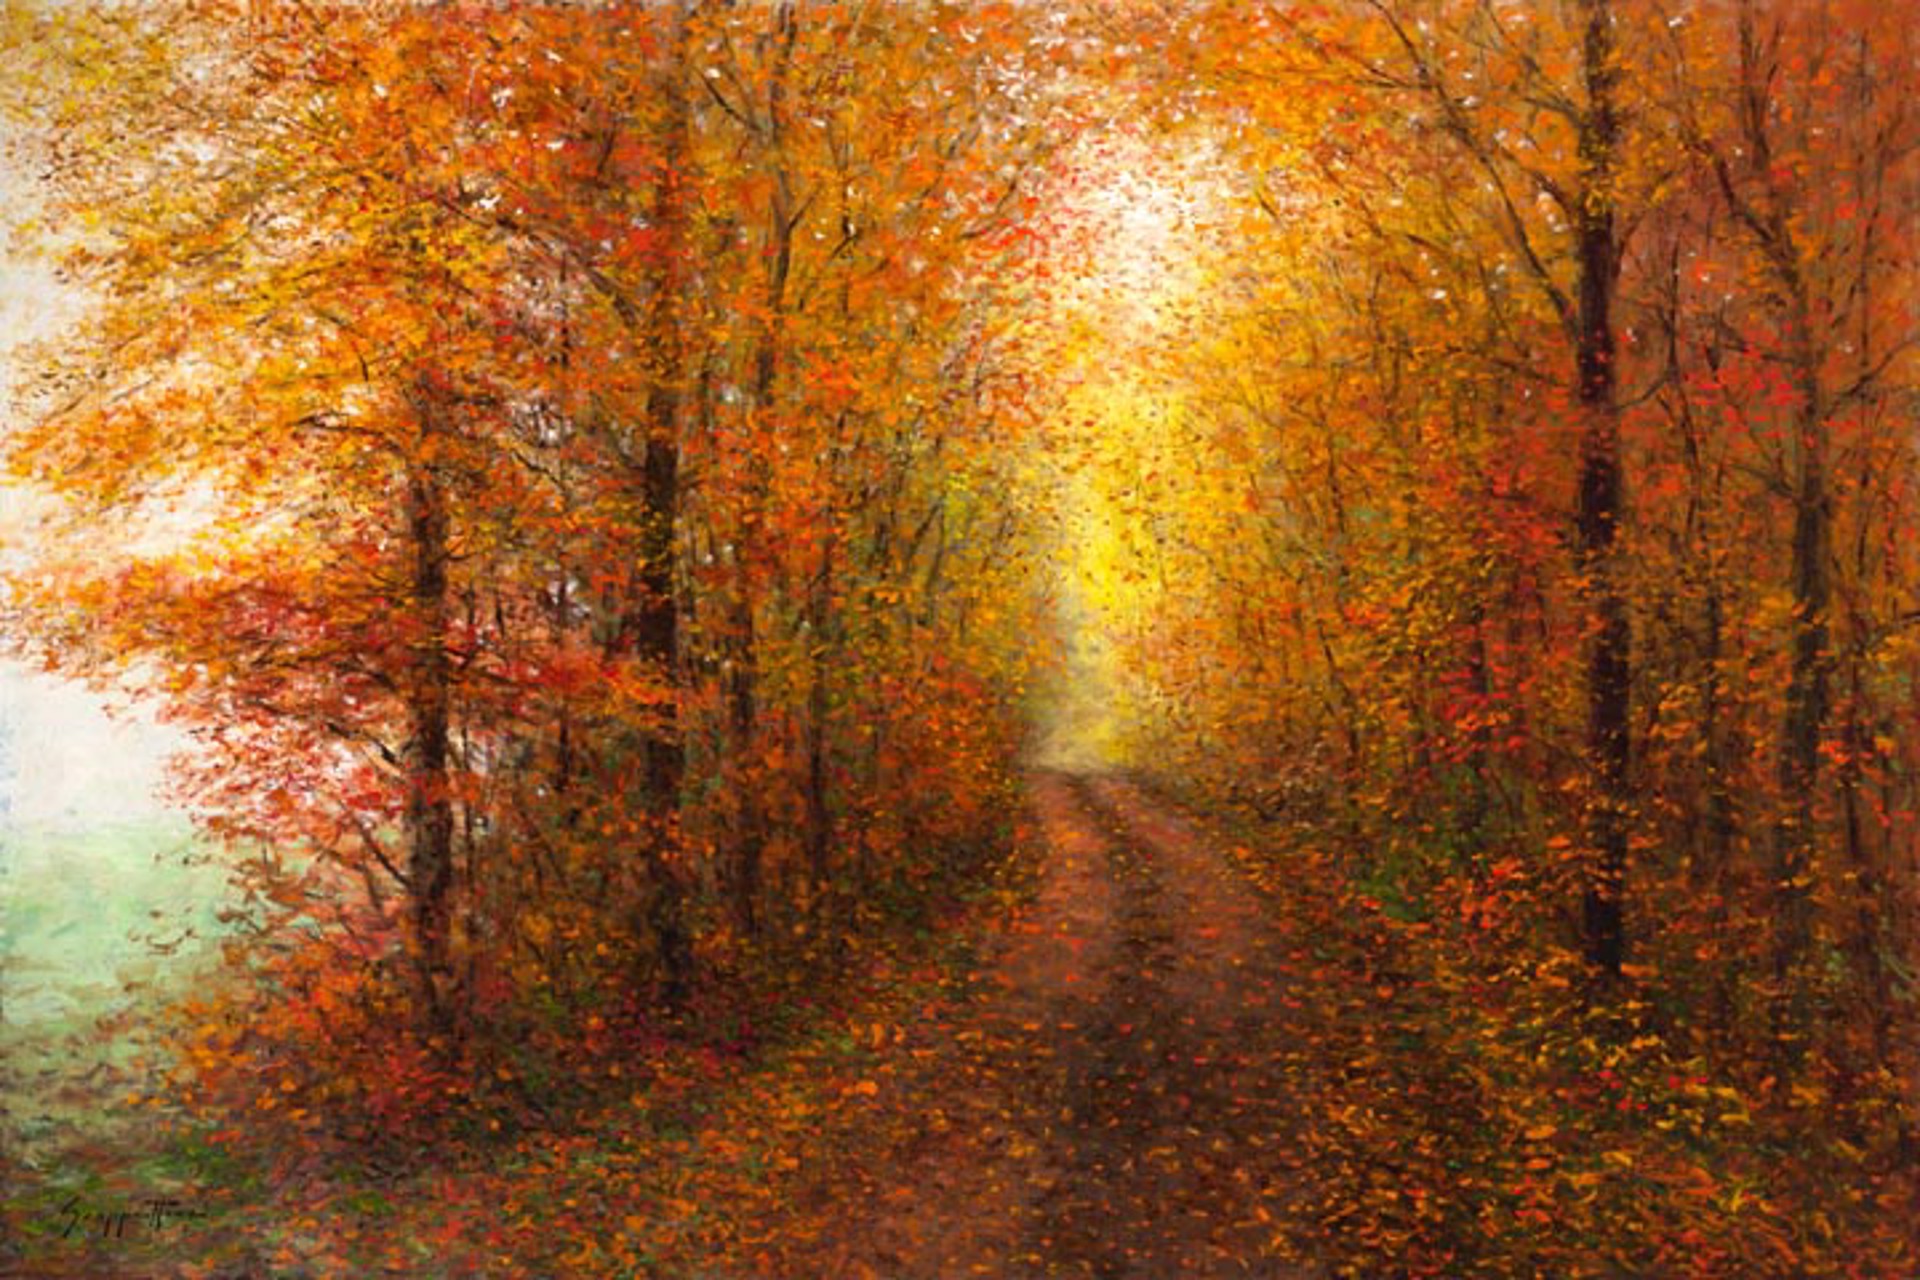 A Misty Autumn Road by James Scoppettone